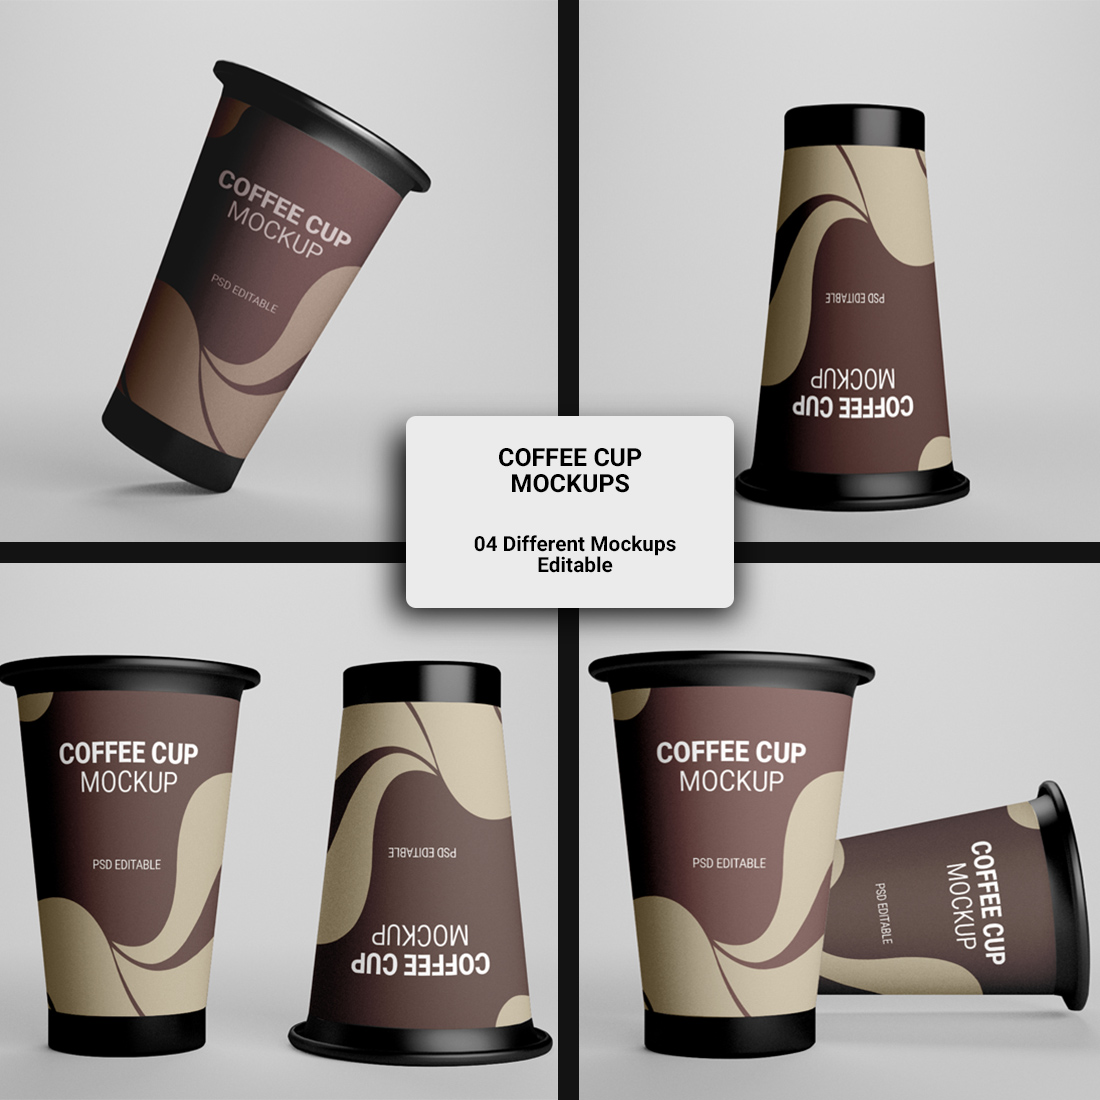 PSD Coffee Cup Mokcups cover image.